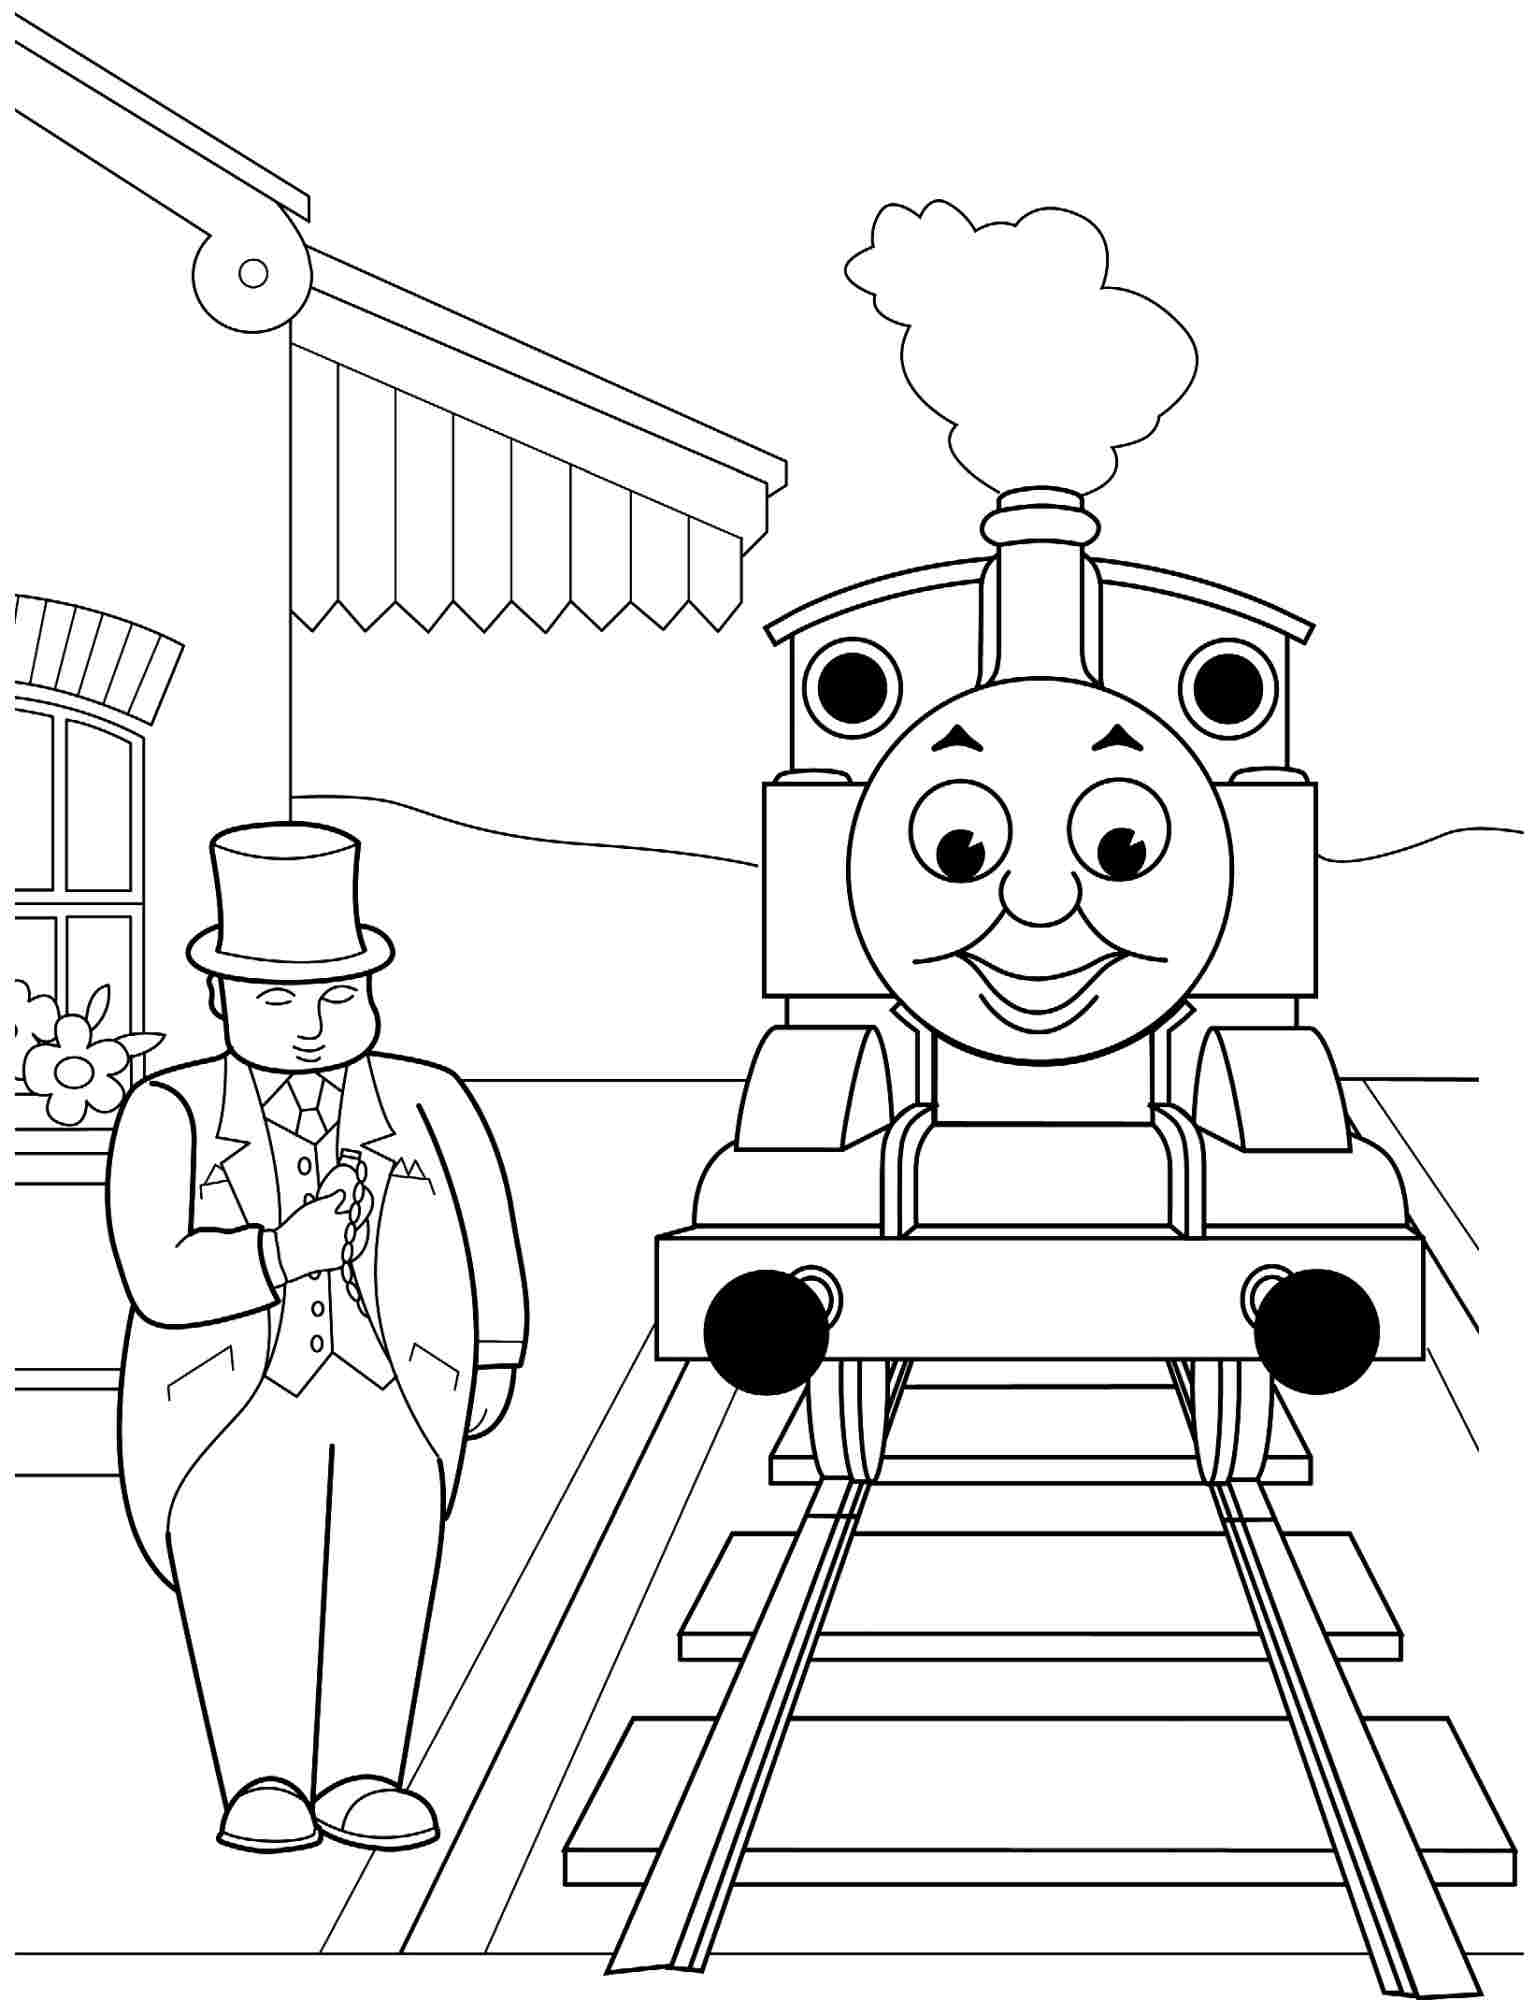 Thomas The Train Coloring Pages Pdf at Free printable colorings pages to